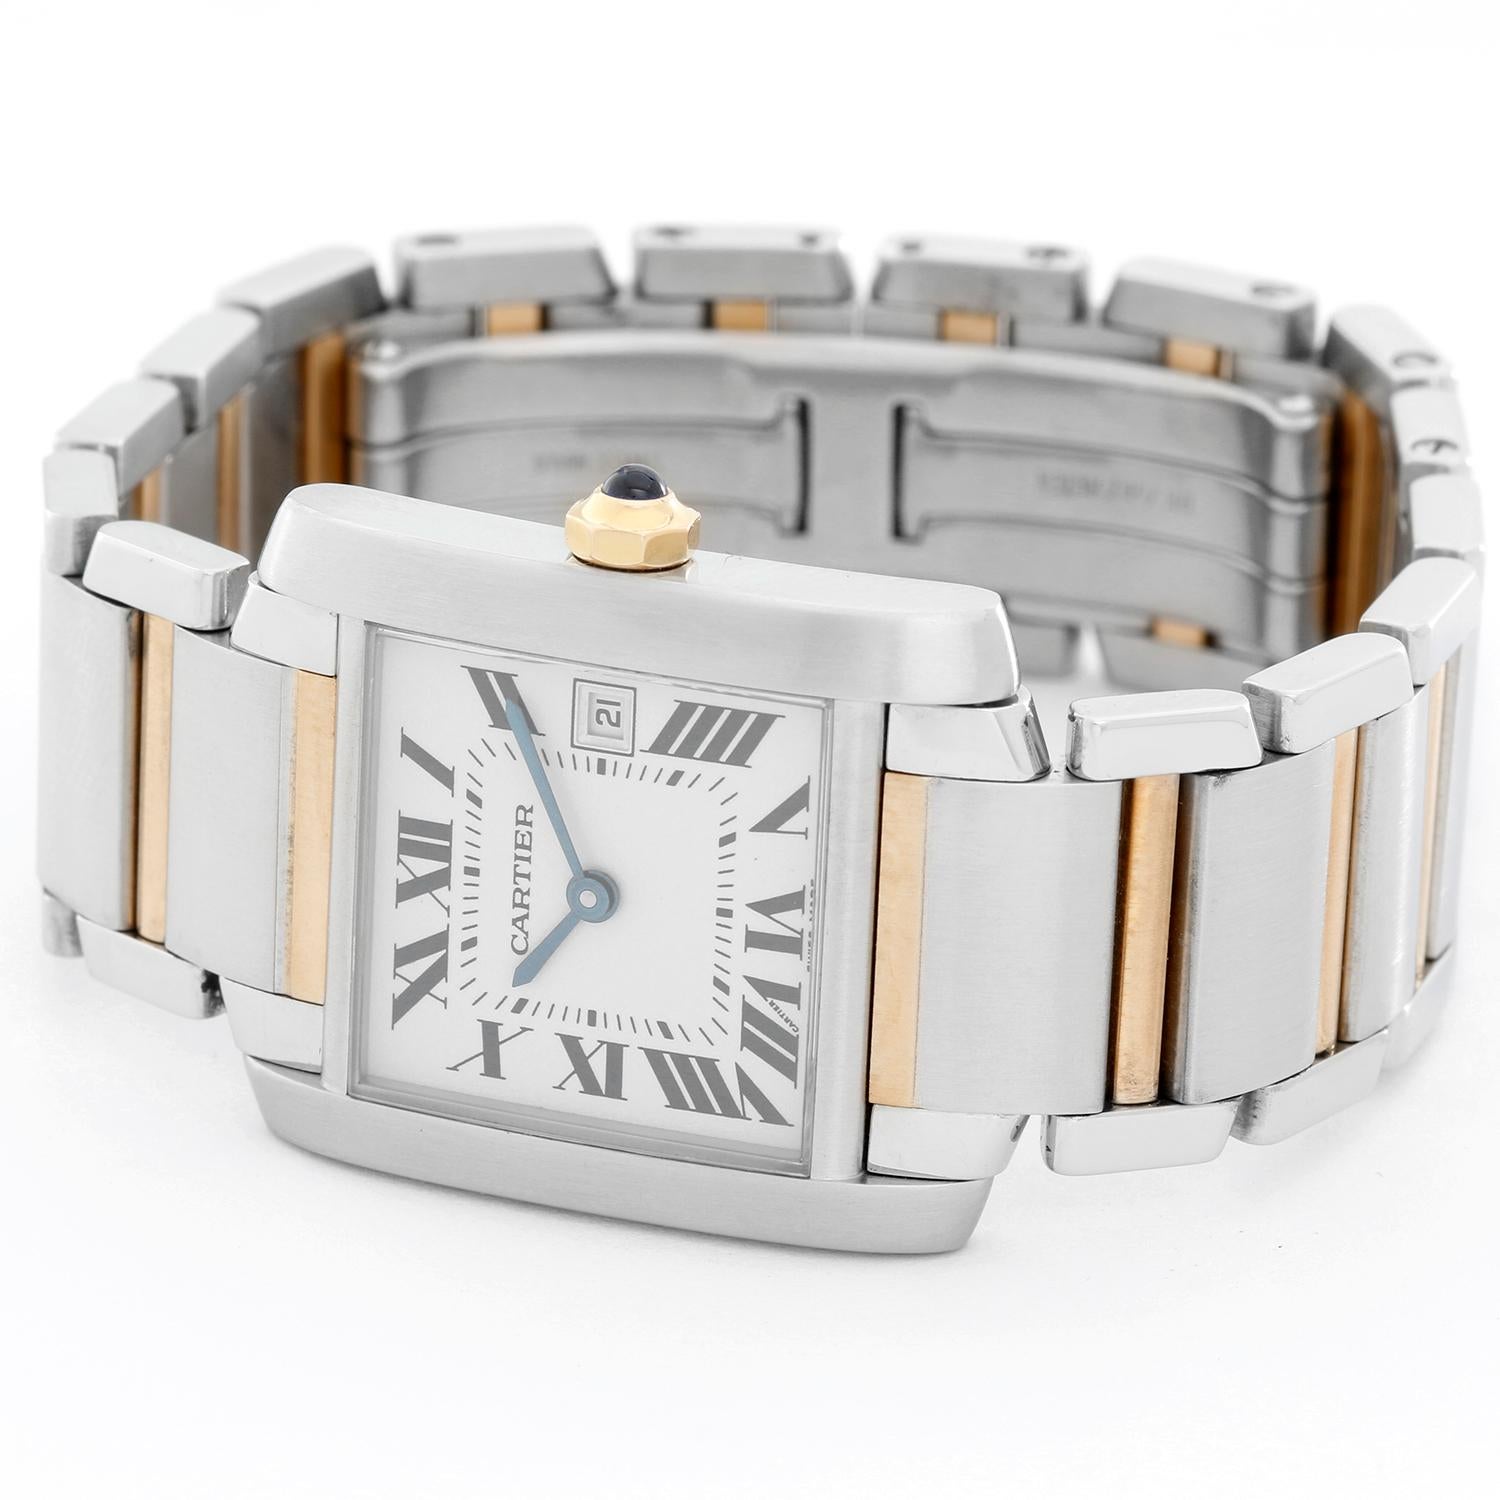 Cartier Tank Francaise Men's 2-Tone Watch W51005Q4 - Quartz. Stainless steel case. Silver guilloche dial with black Roman numerals; date at 3 o'clock. Stainless steel and 18k yellow gold Cartier bracelet with deployant buckle. Pre-owned with Cartier